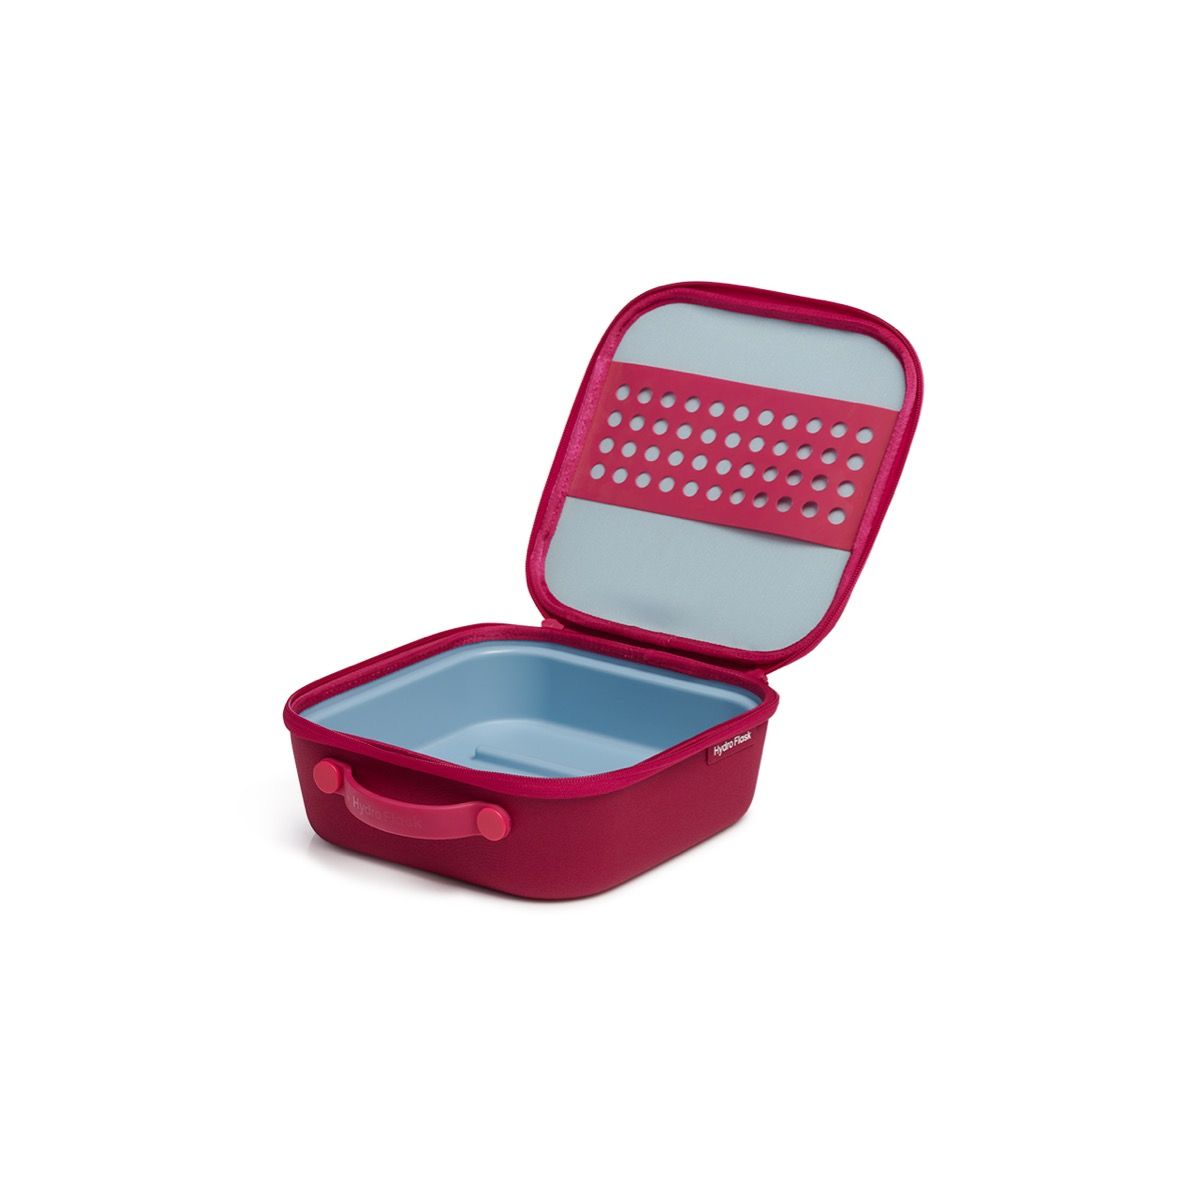 Kids Small Insulated Lunch Box Peony